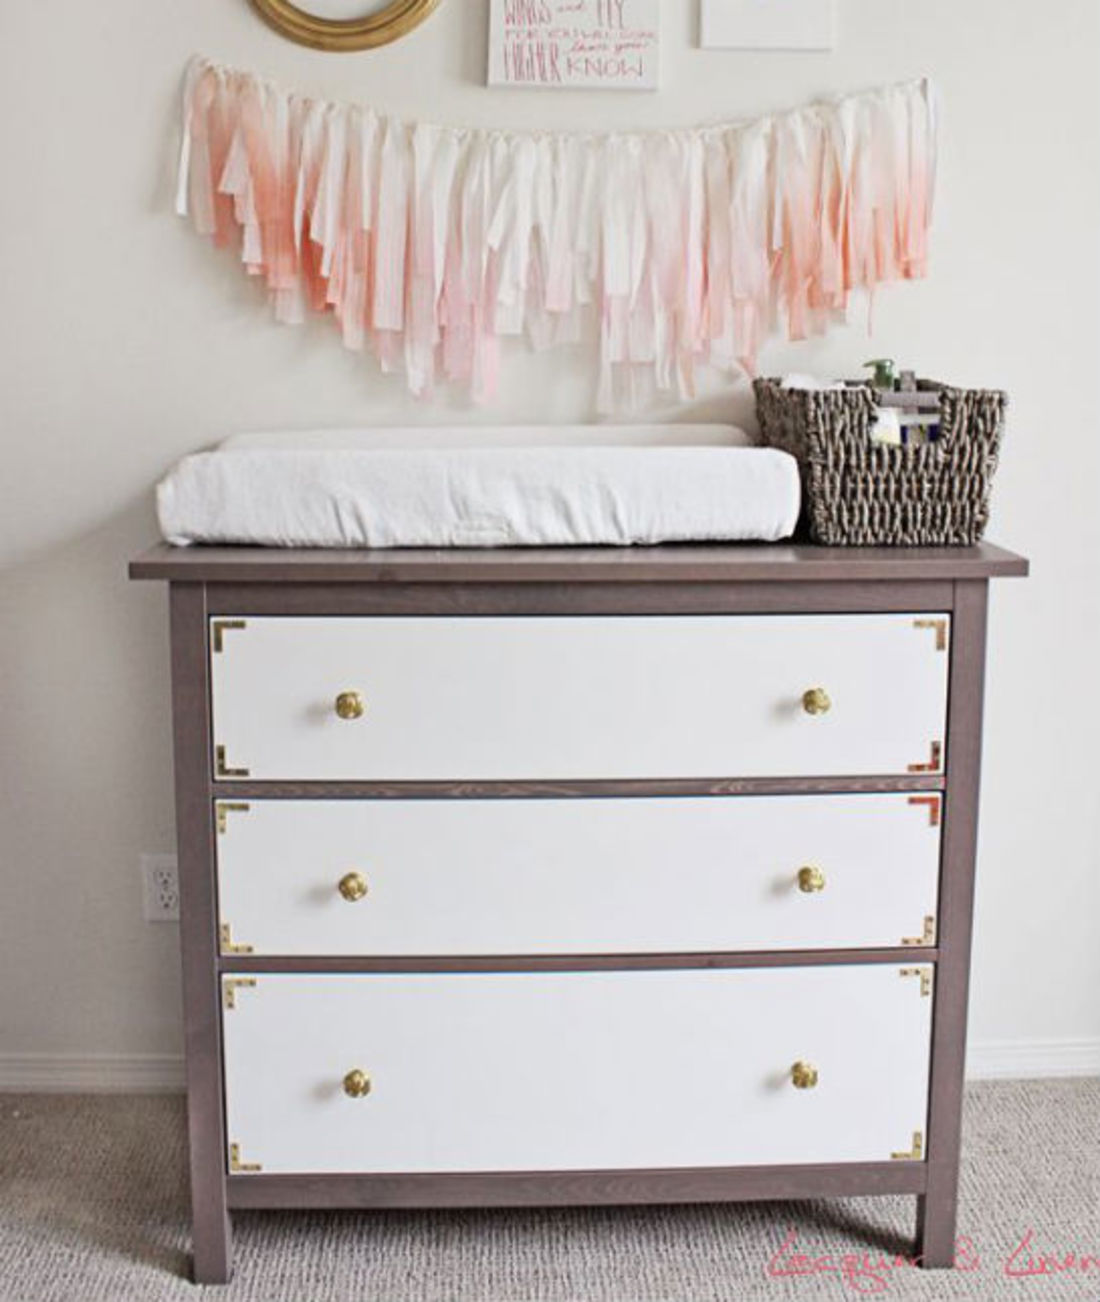 ikea dresser and changing table